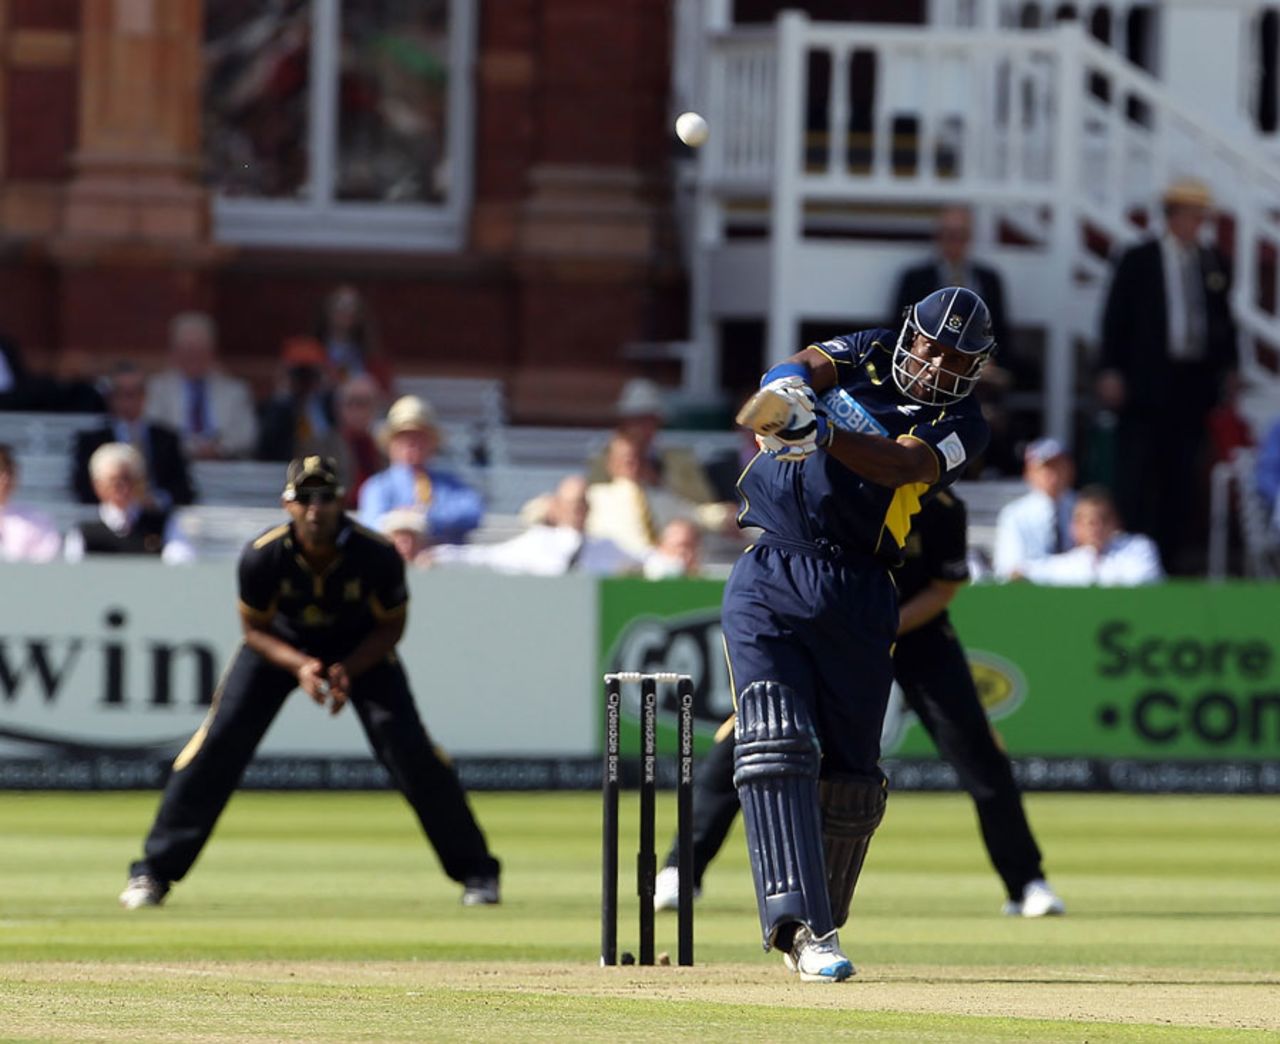 Michael Carberry launches a six as Hampshire started brightly, Hampshire v Warwickshire, CB40 Final, Lord's, September, 15, 2012